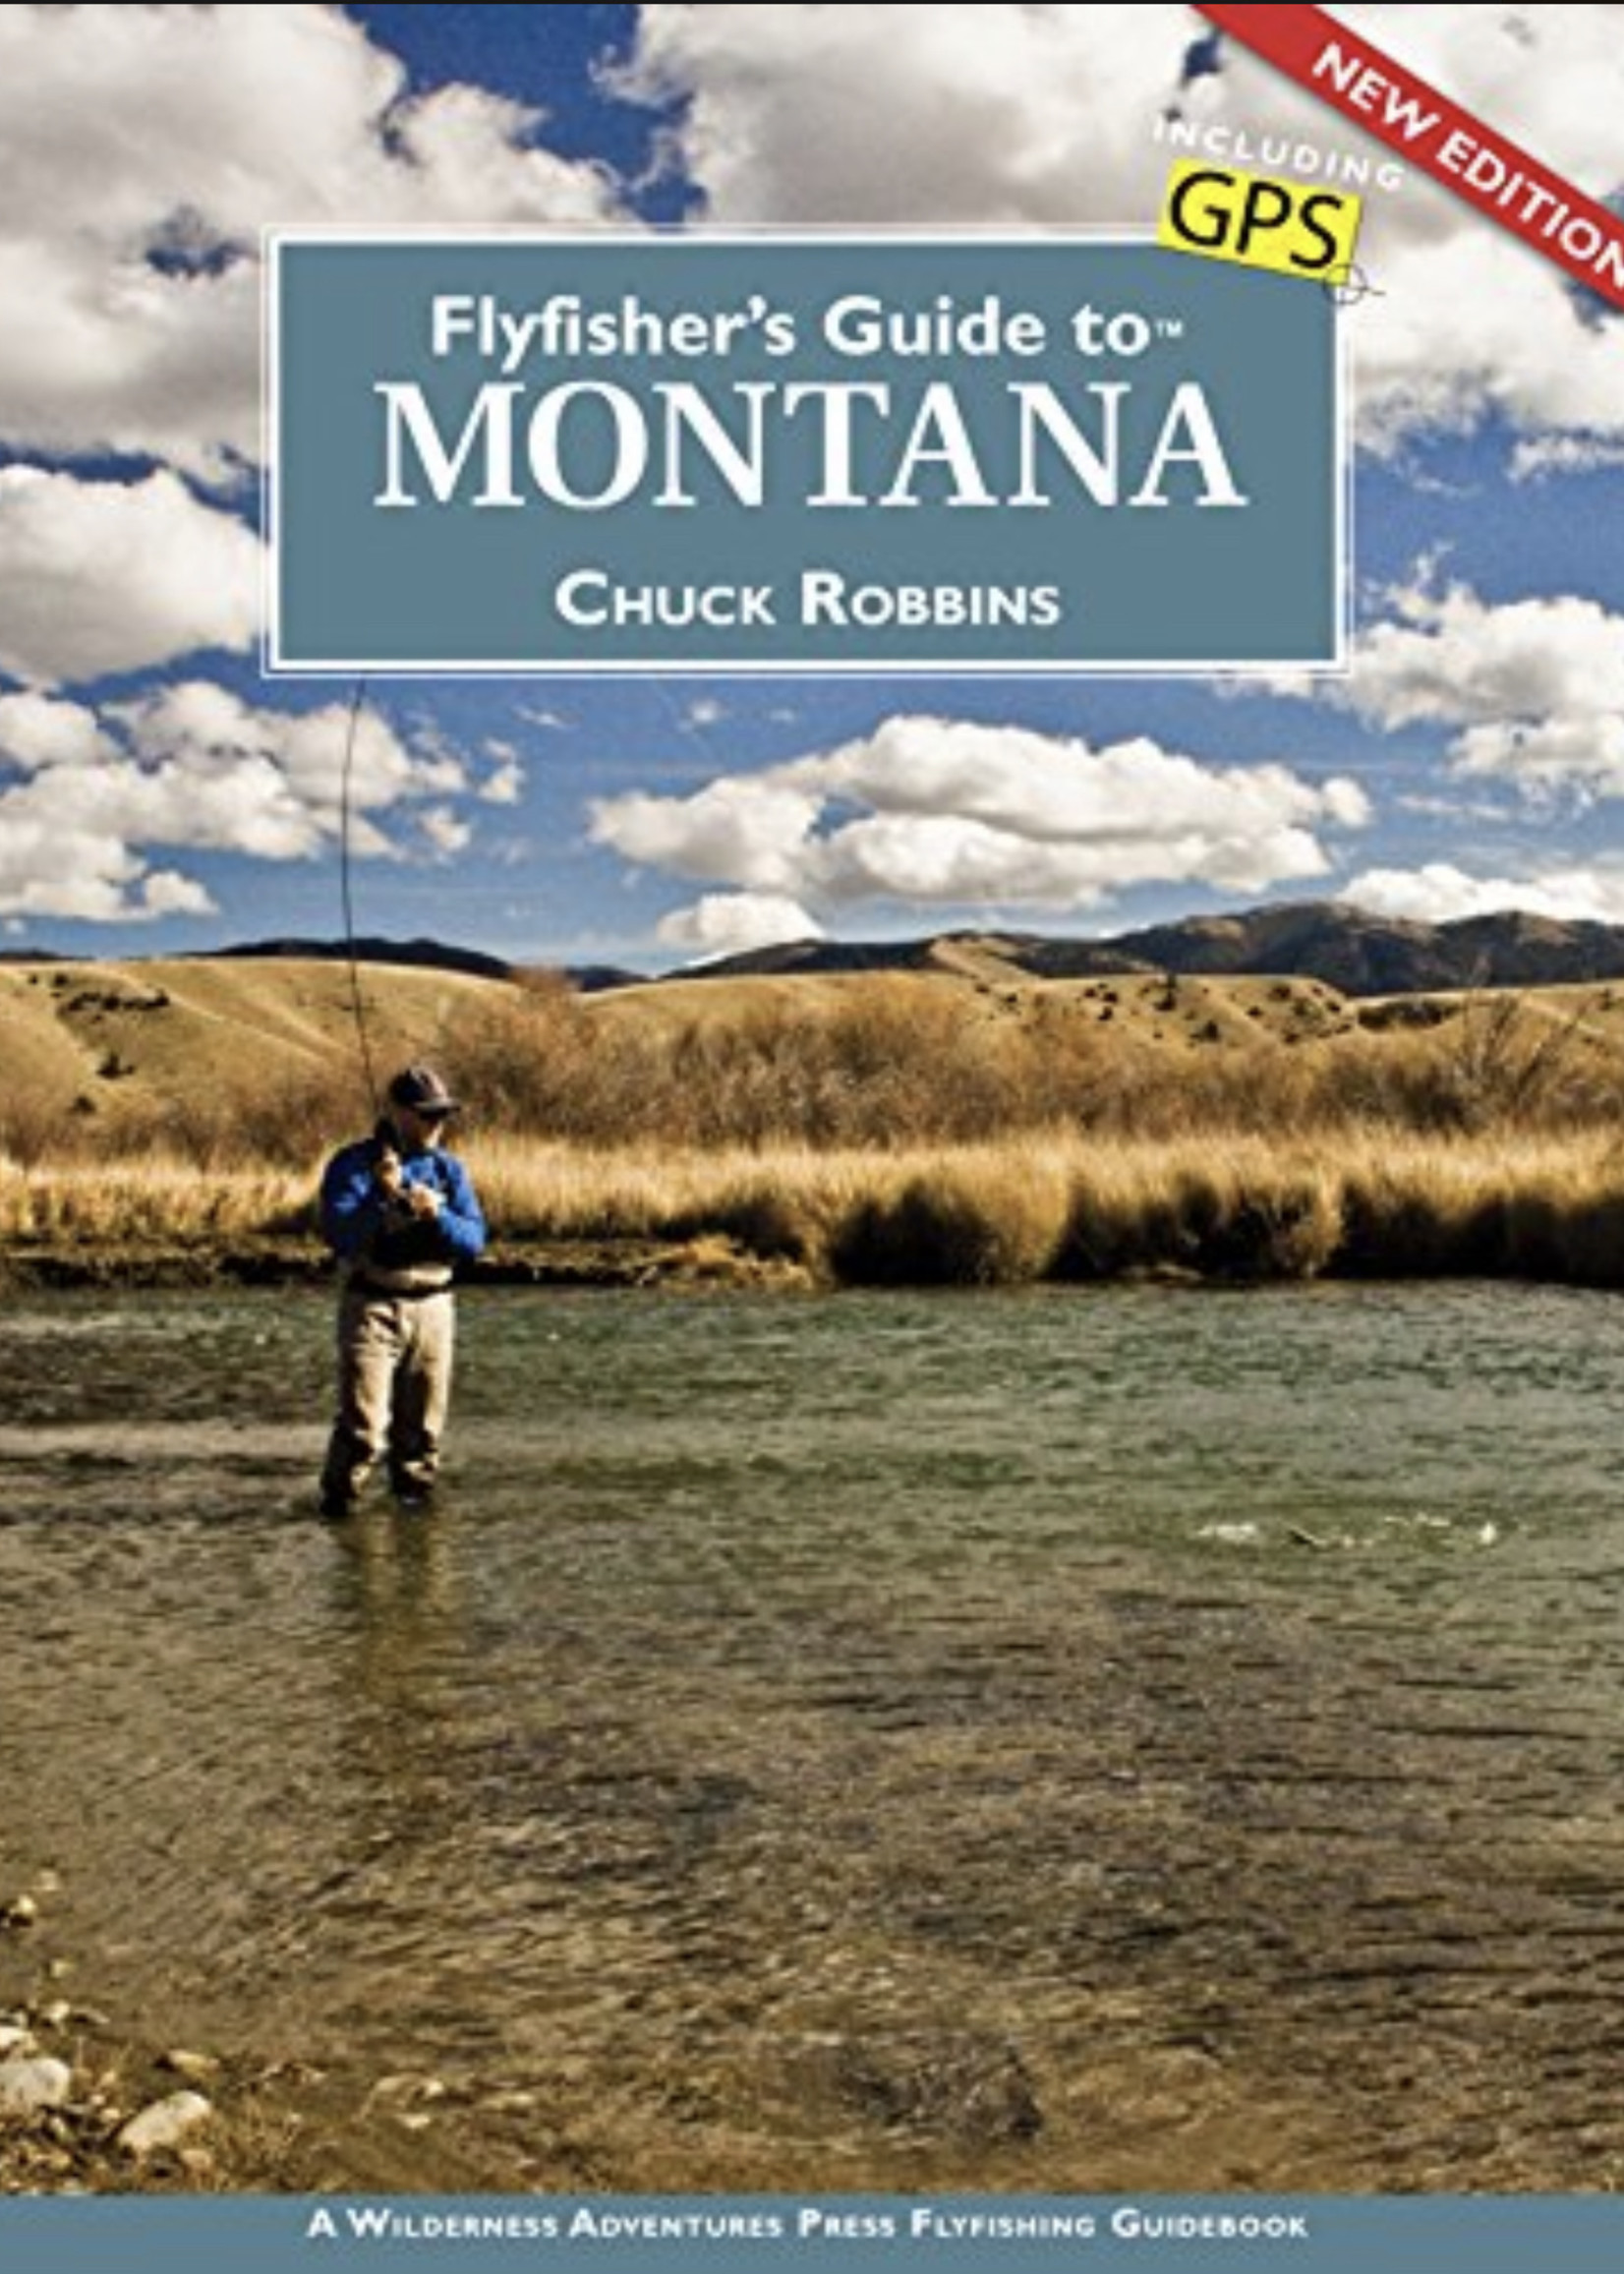 Flyfisher’s Guide to Montana